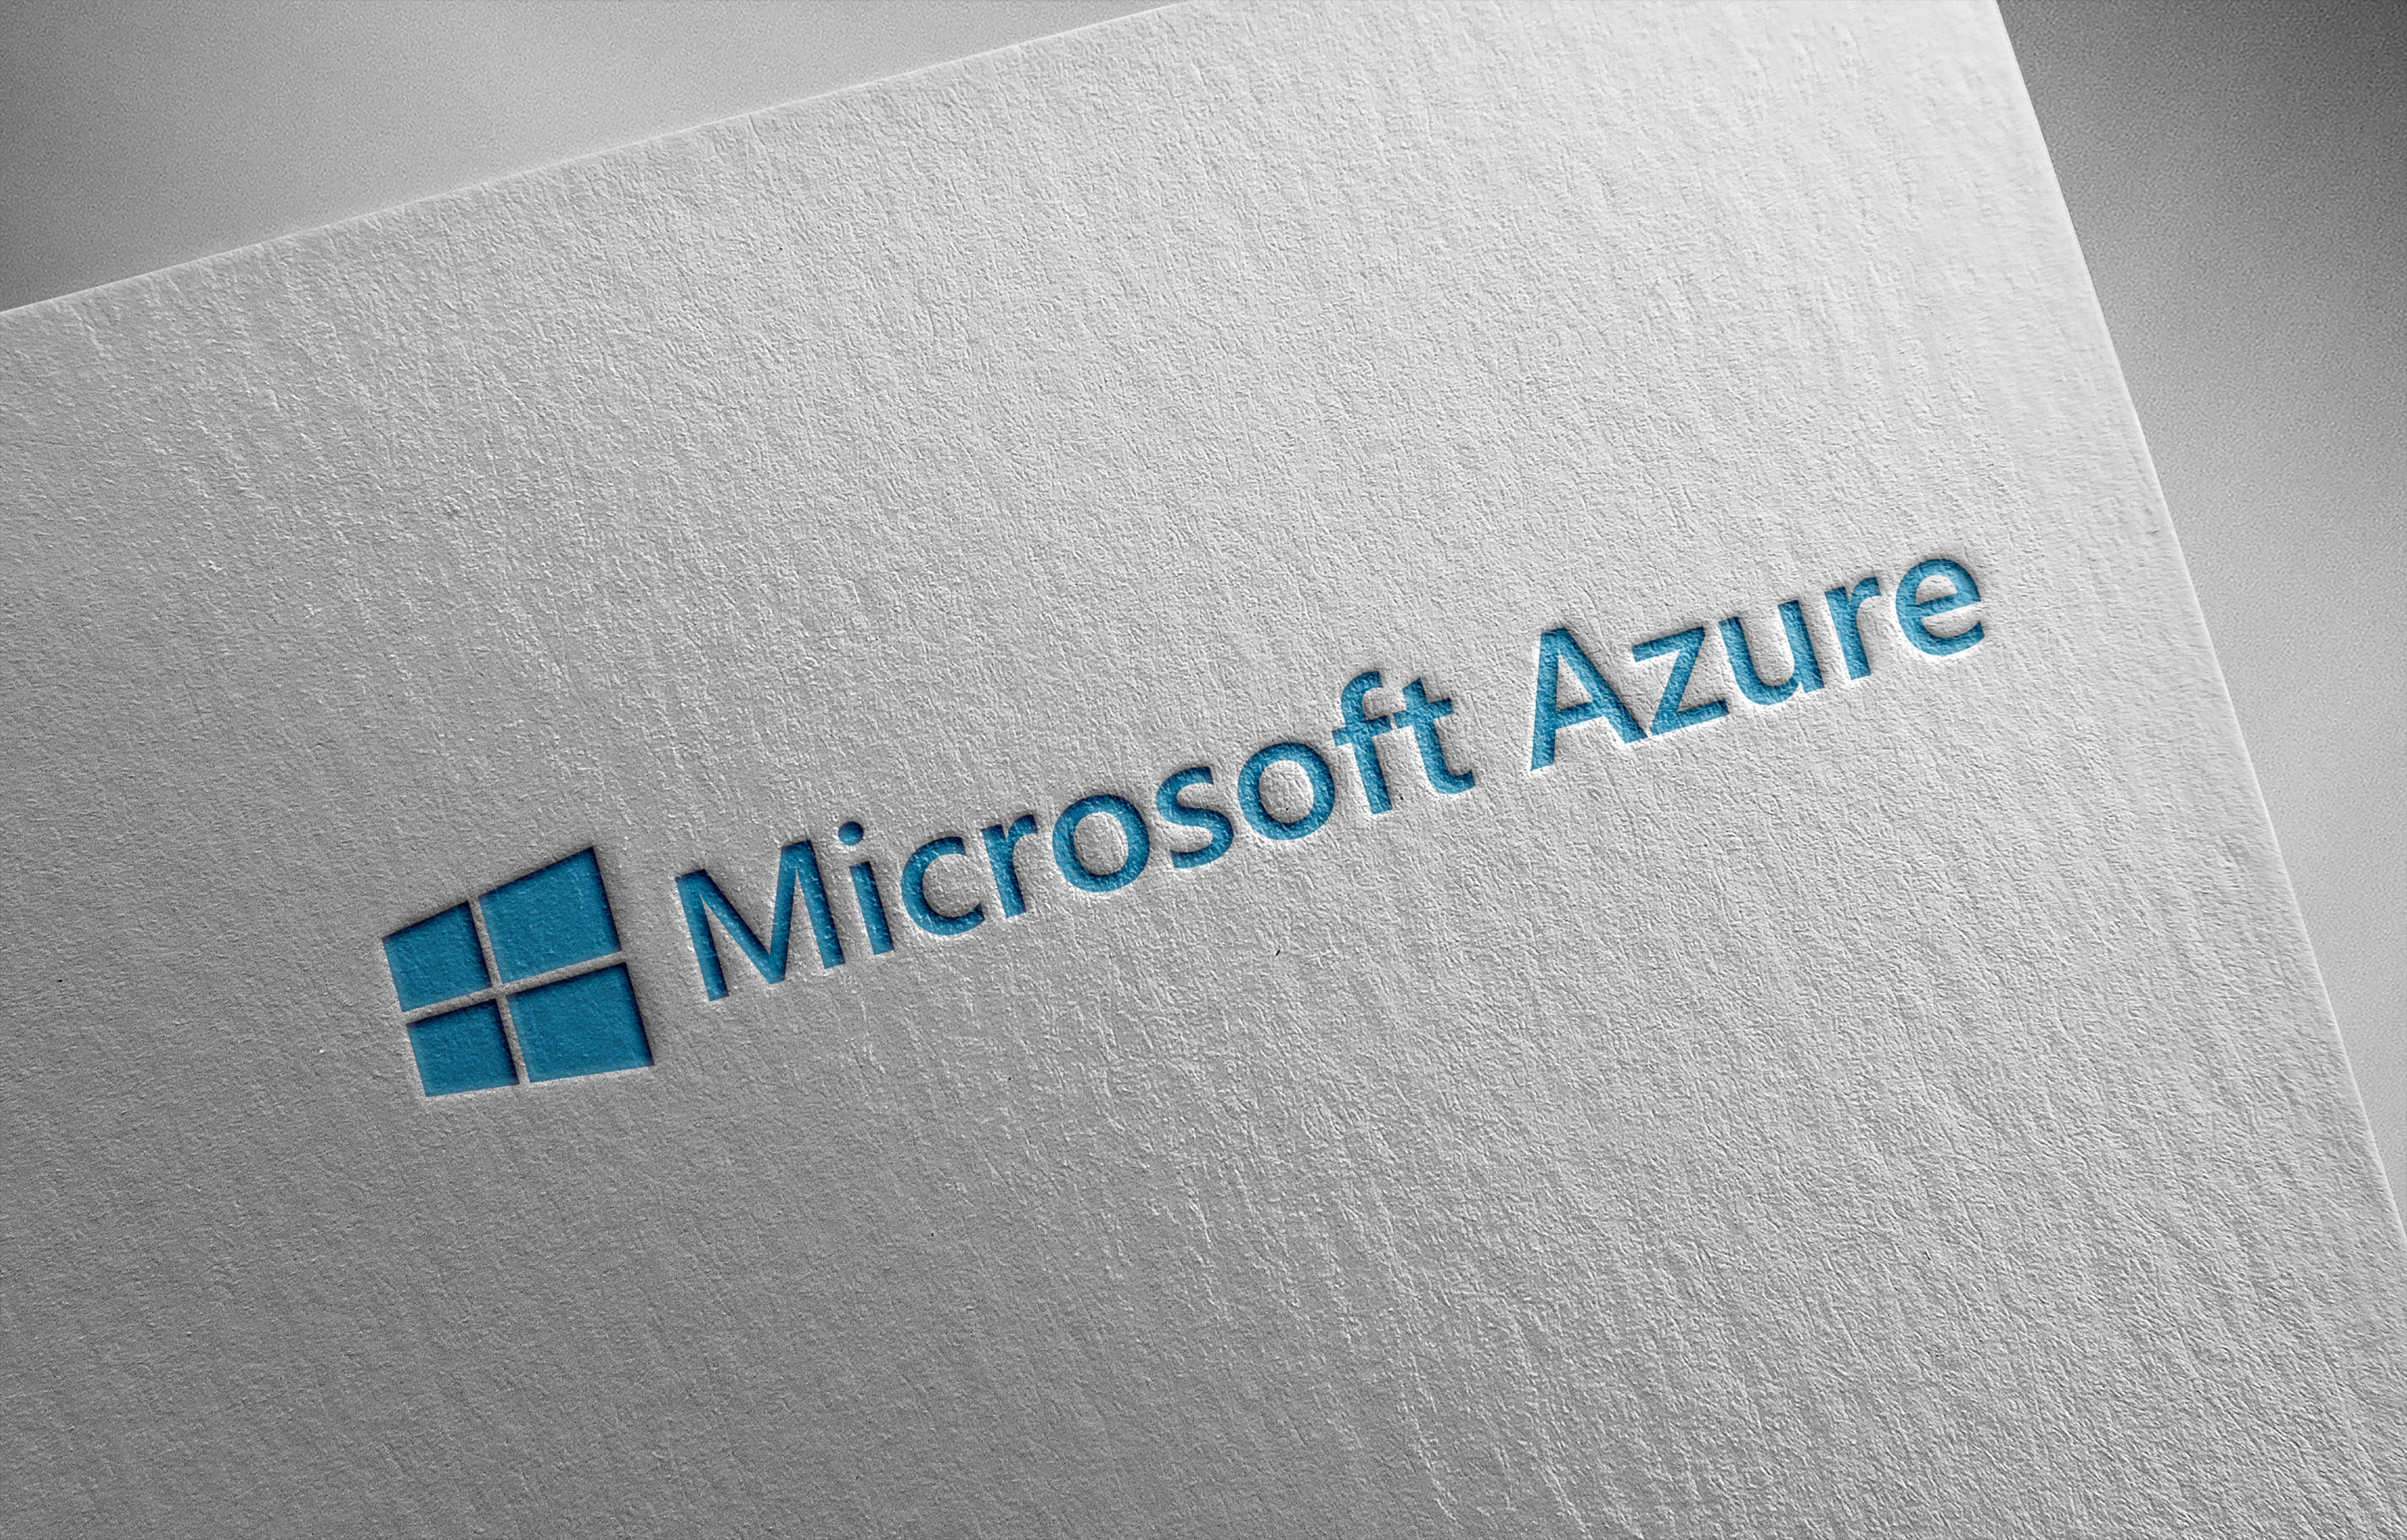 Featured image: Microsoft Azure branded document. - Read full post: Introduction to the Cloud and Microsoft Azure